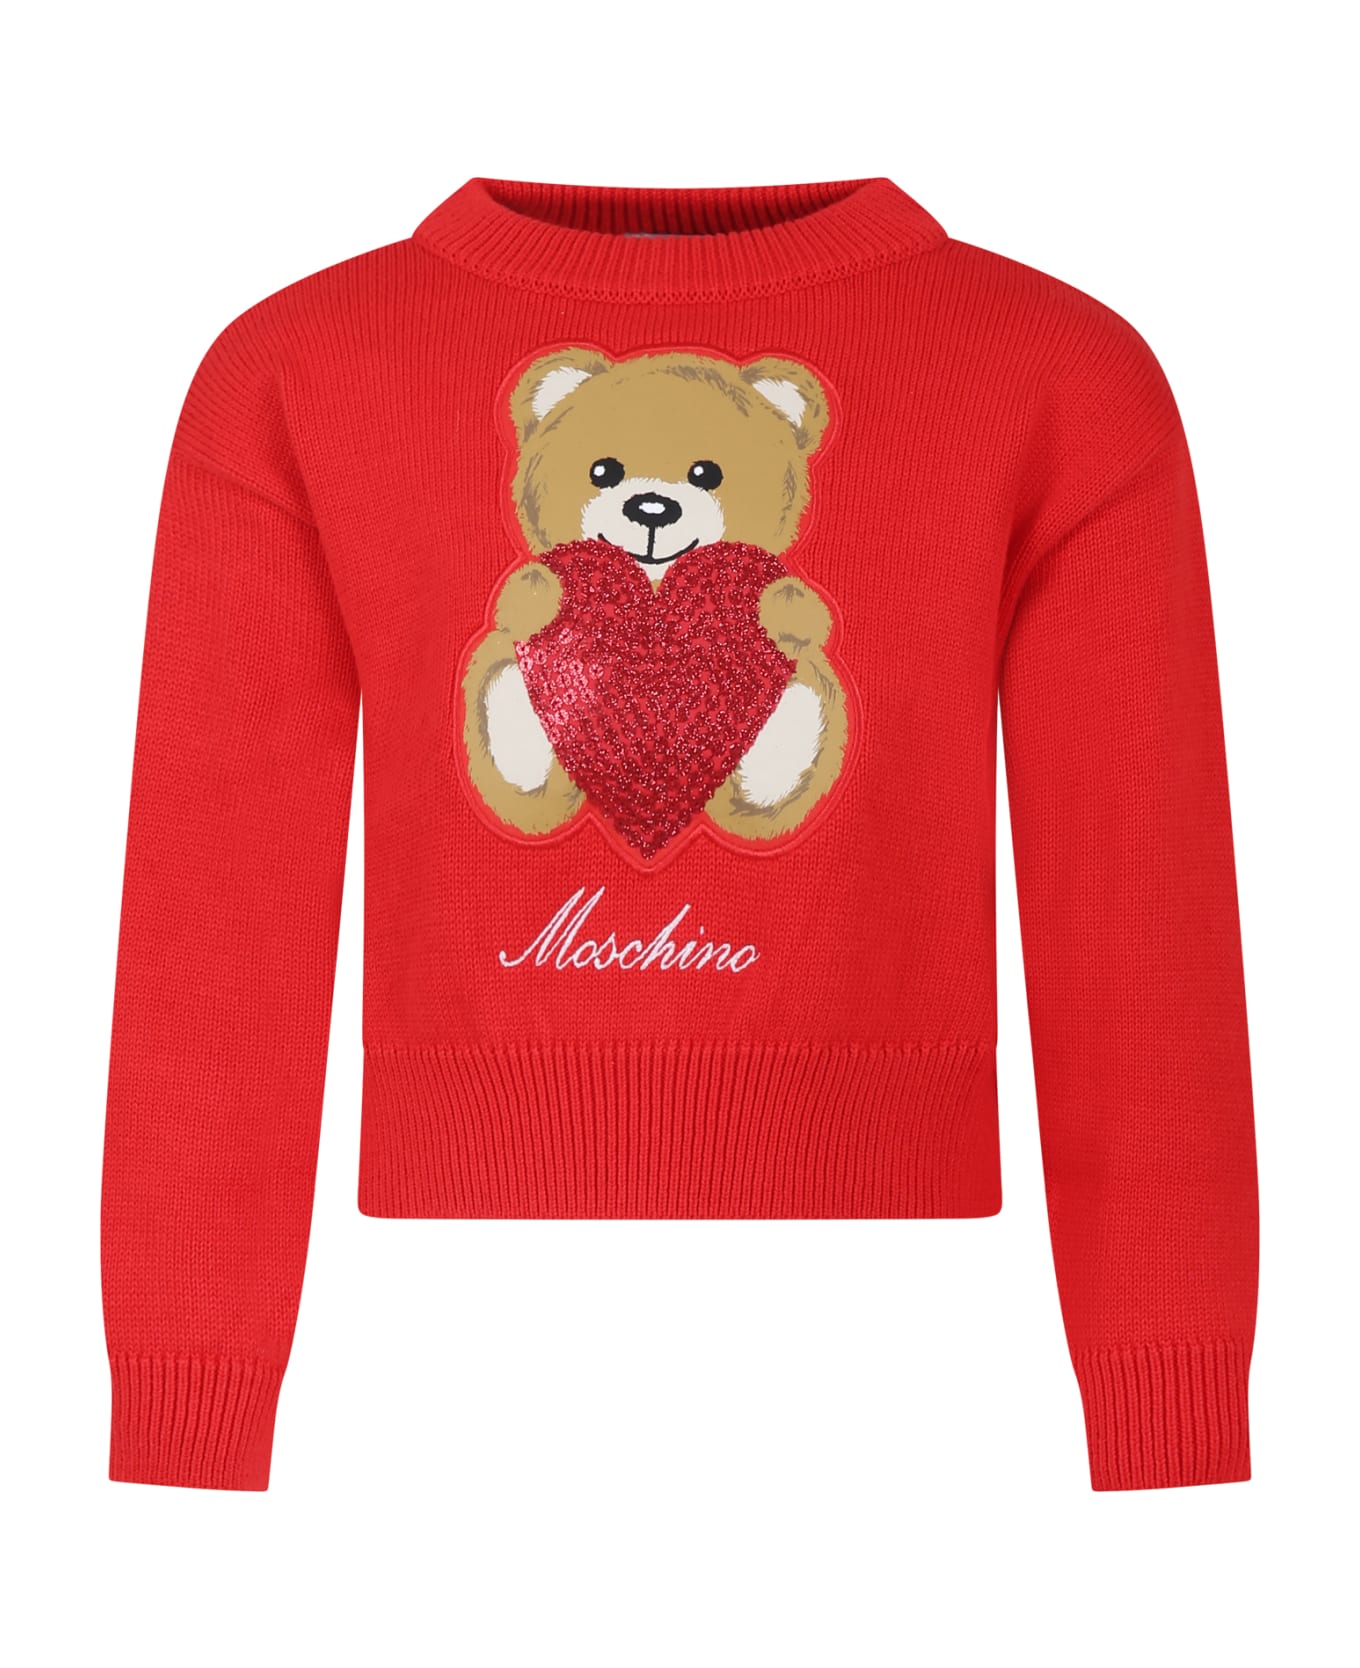 Moschino Red Sweater For Girl With Teddy Bear And Heart - Red